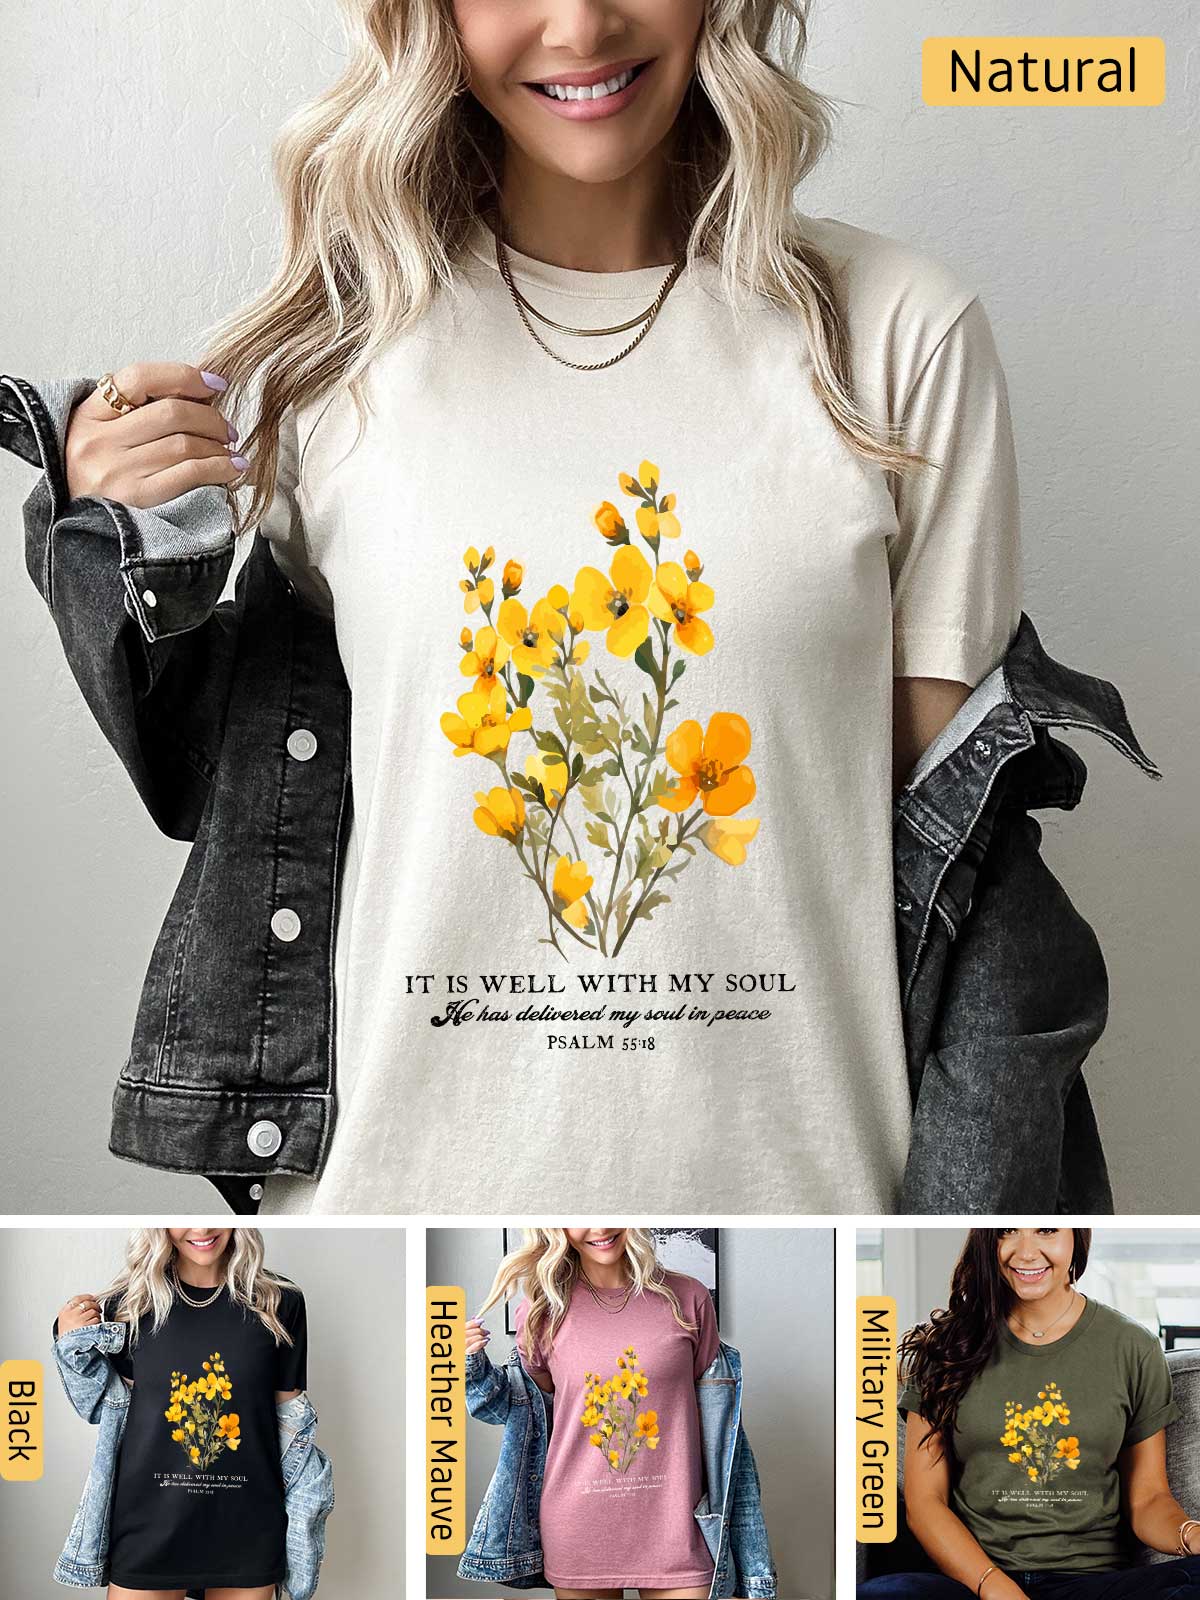 a woman wearing a t - shirt with yellow flowers on it